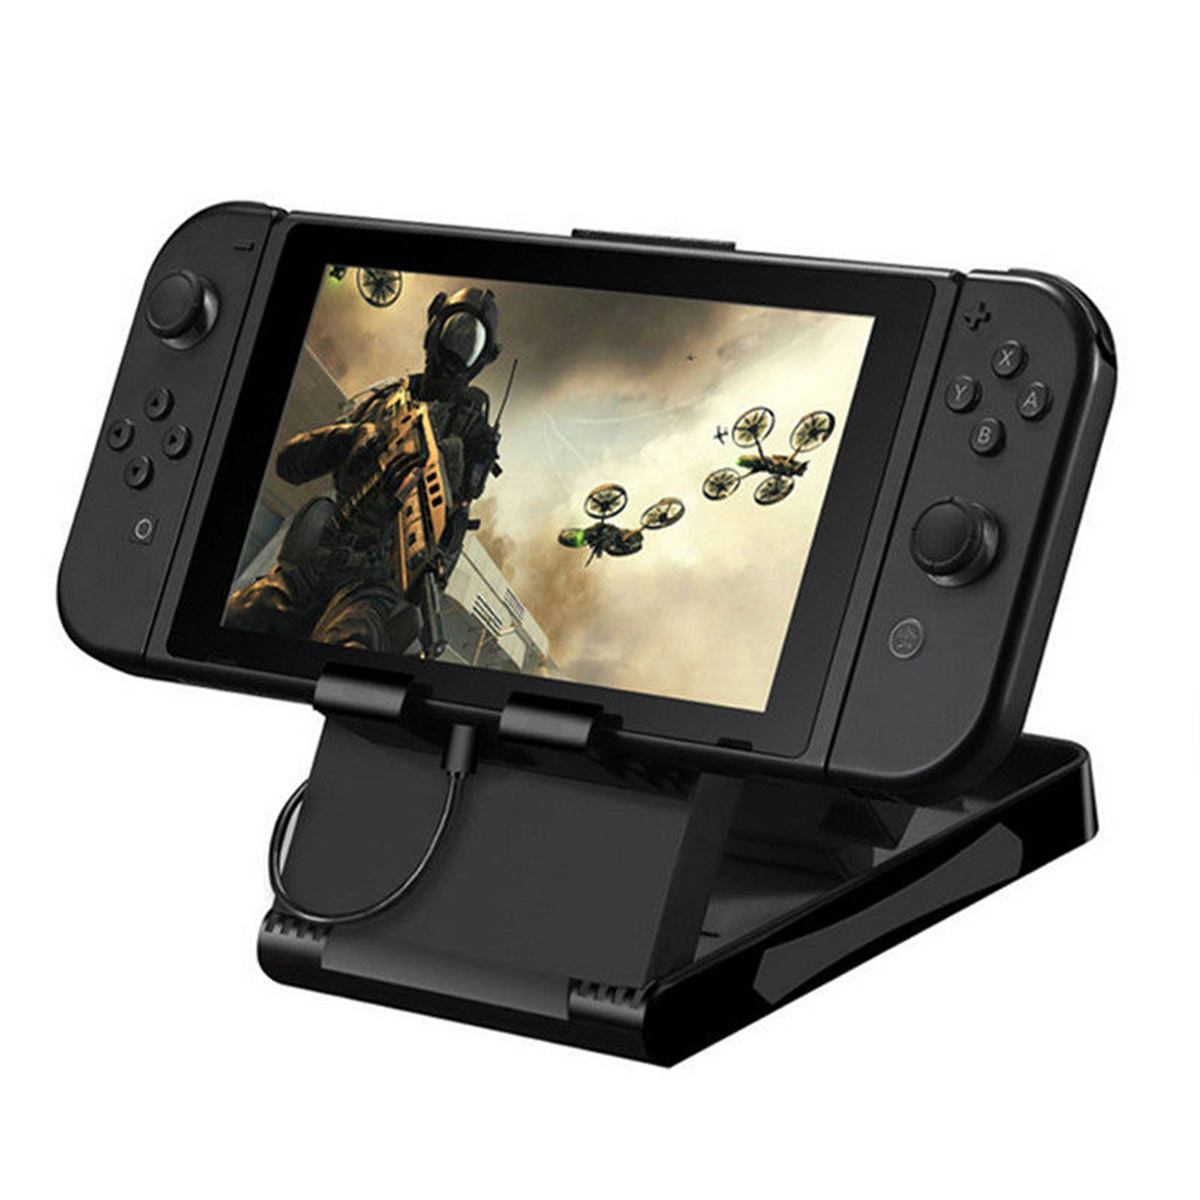 Bracket Stand Holder Mount Display Dock for Nintendo Switch Game Console 65